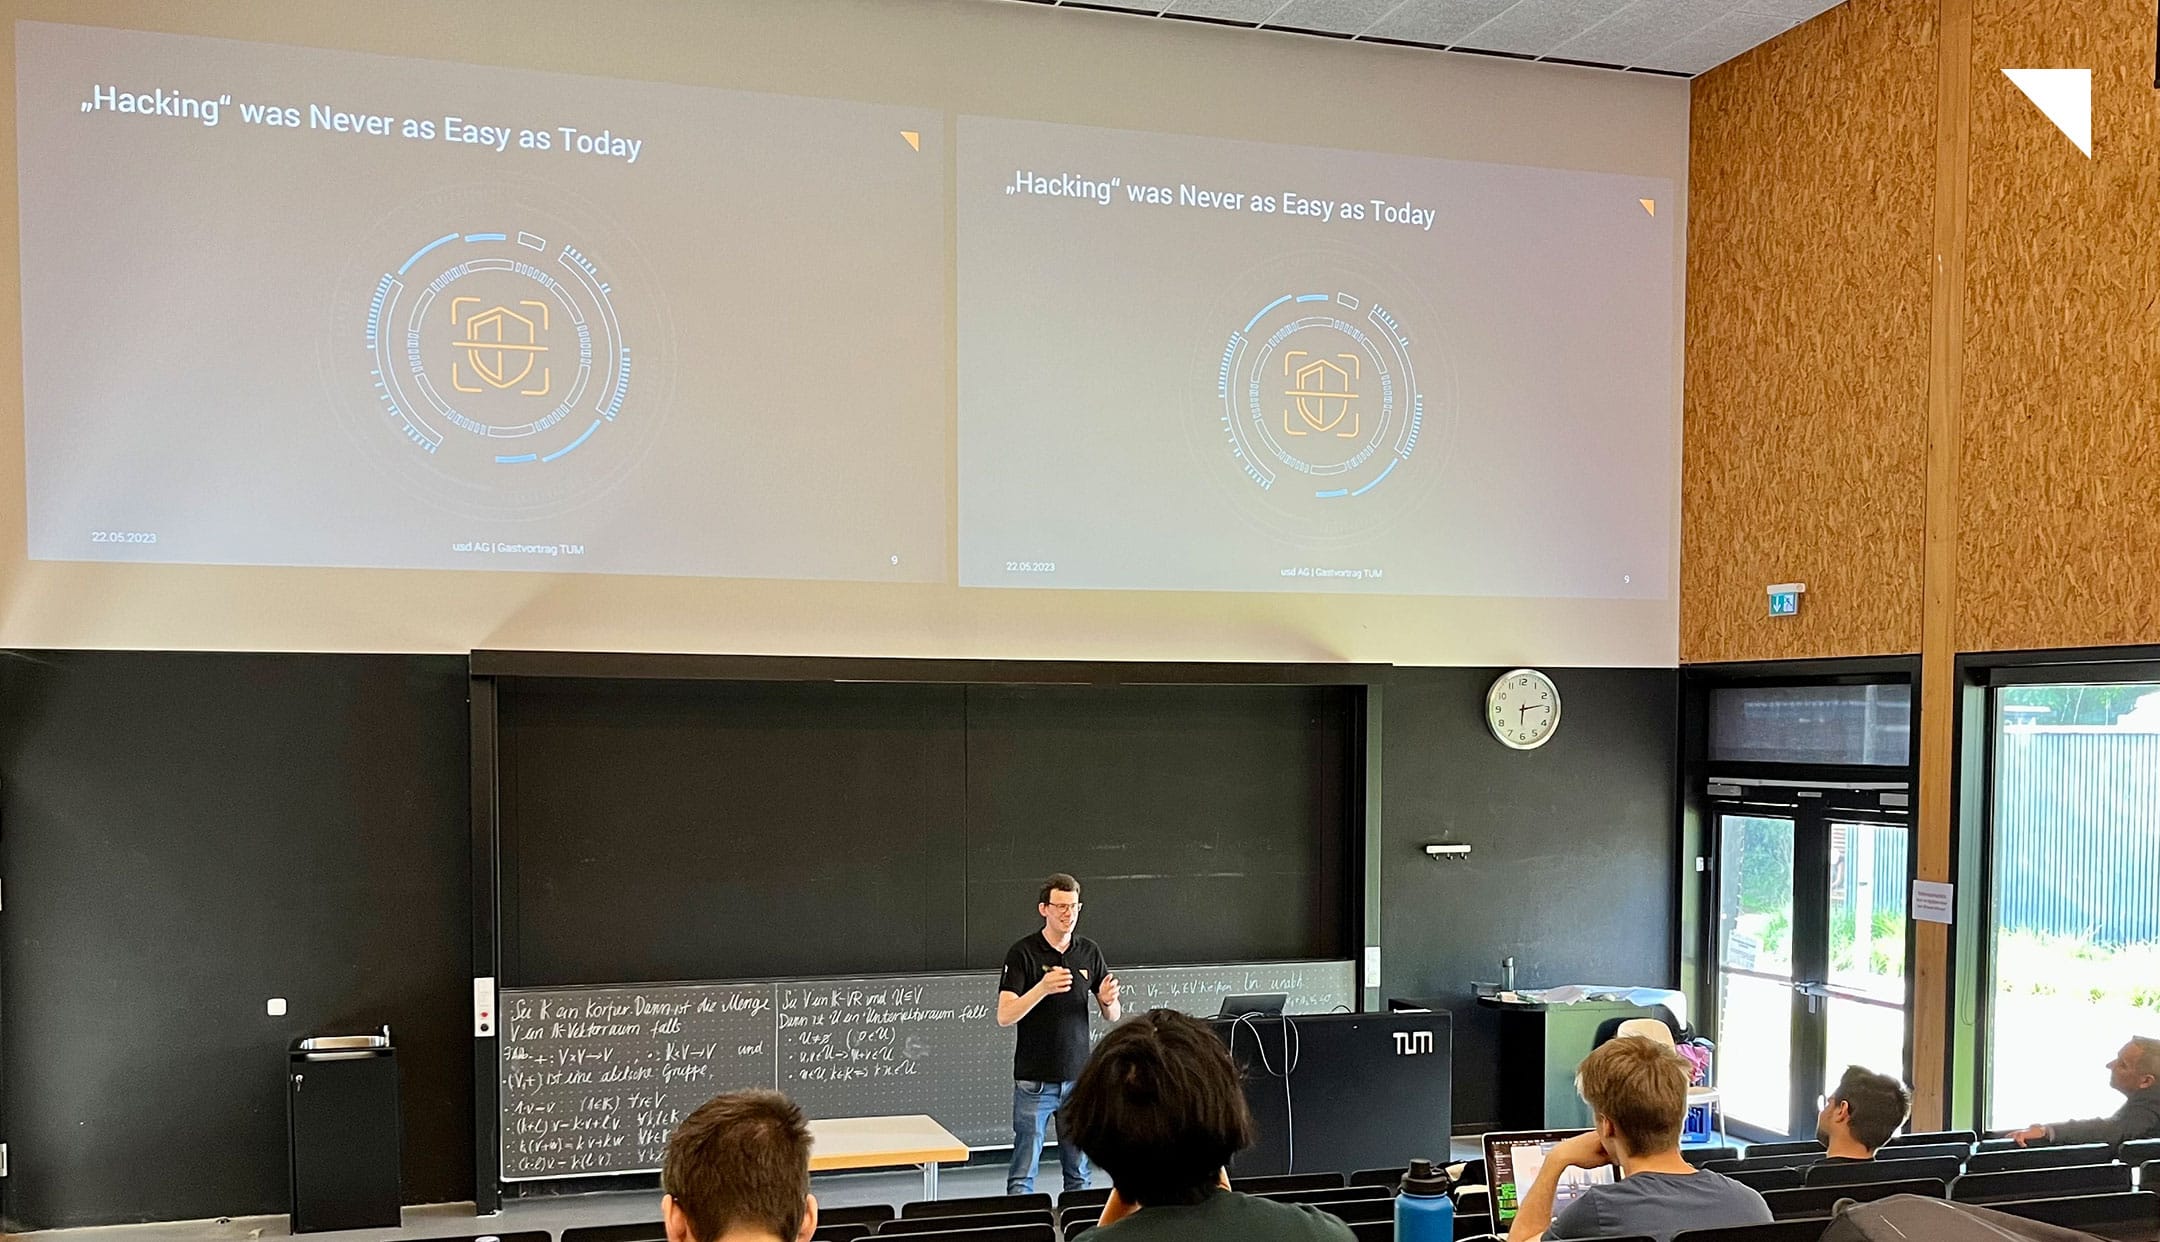 Technical Security Analysis and Penetration Testing: usd AG Visits Technical University of Munich for Guest Lecture